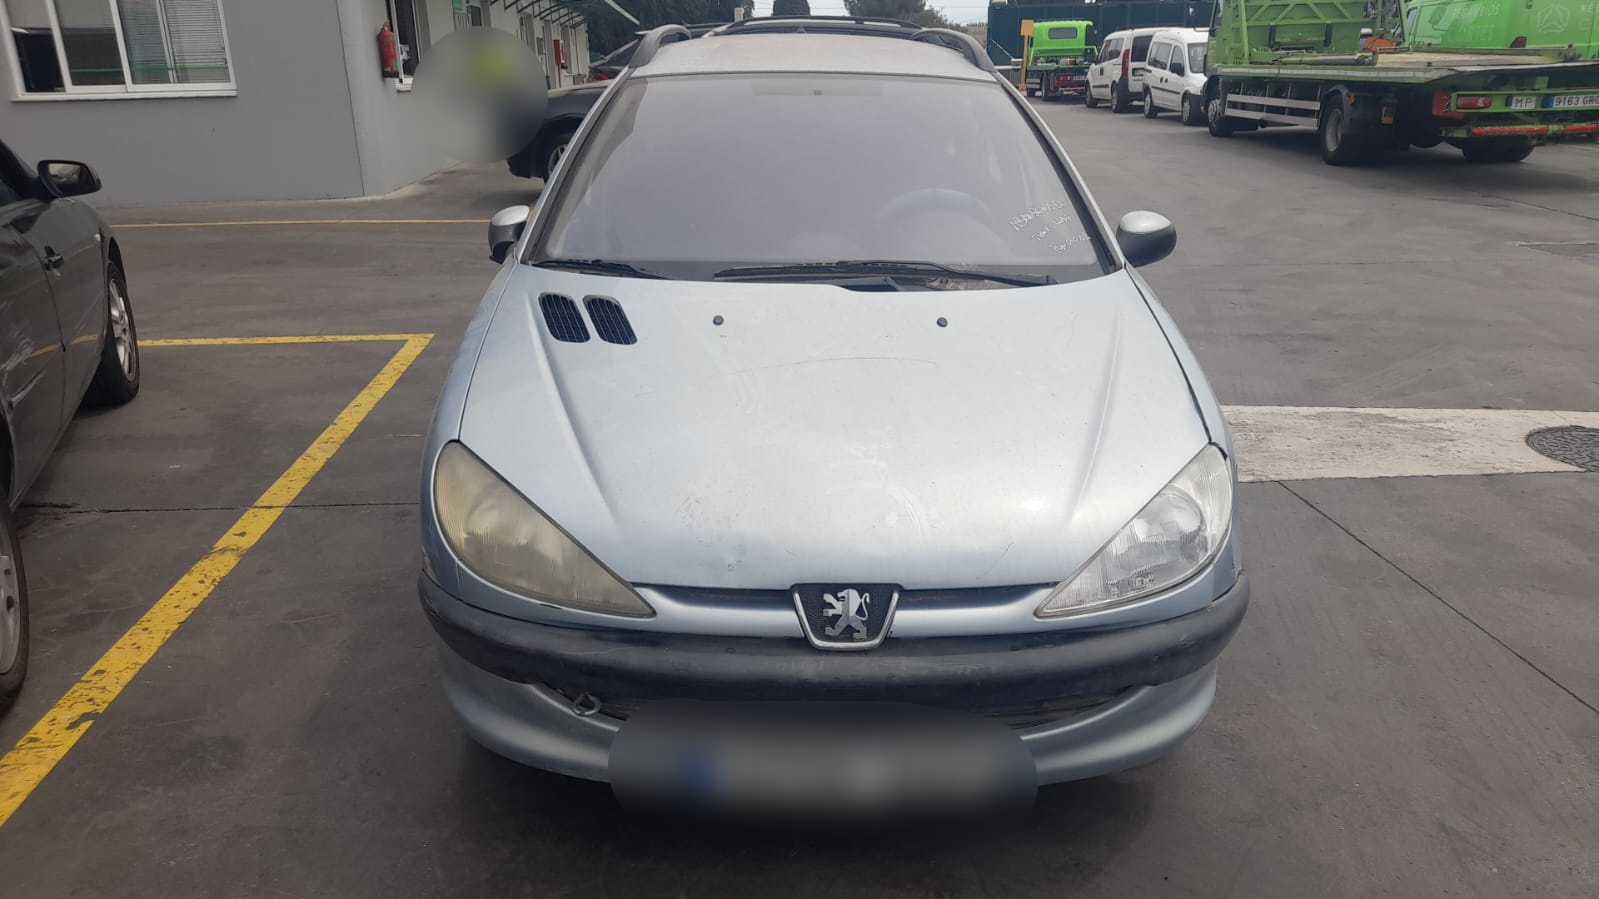 PEUGEOT 206 1 generation (1998-2009) Other Interior Parts 9641014877, 21659385 25016894